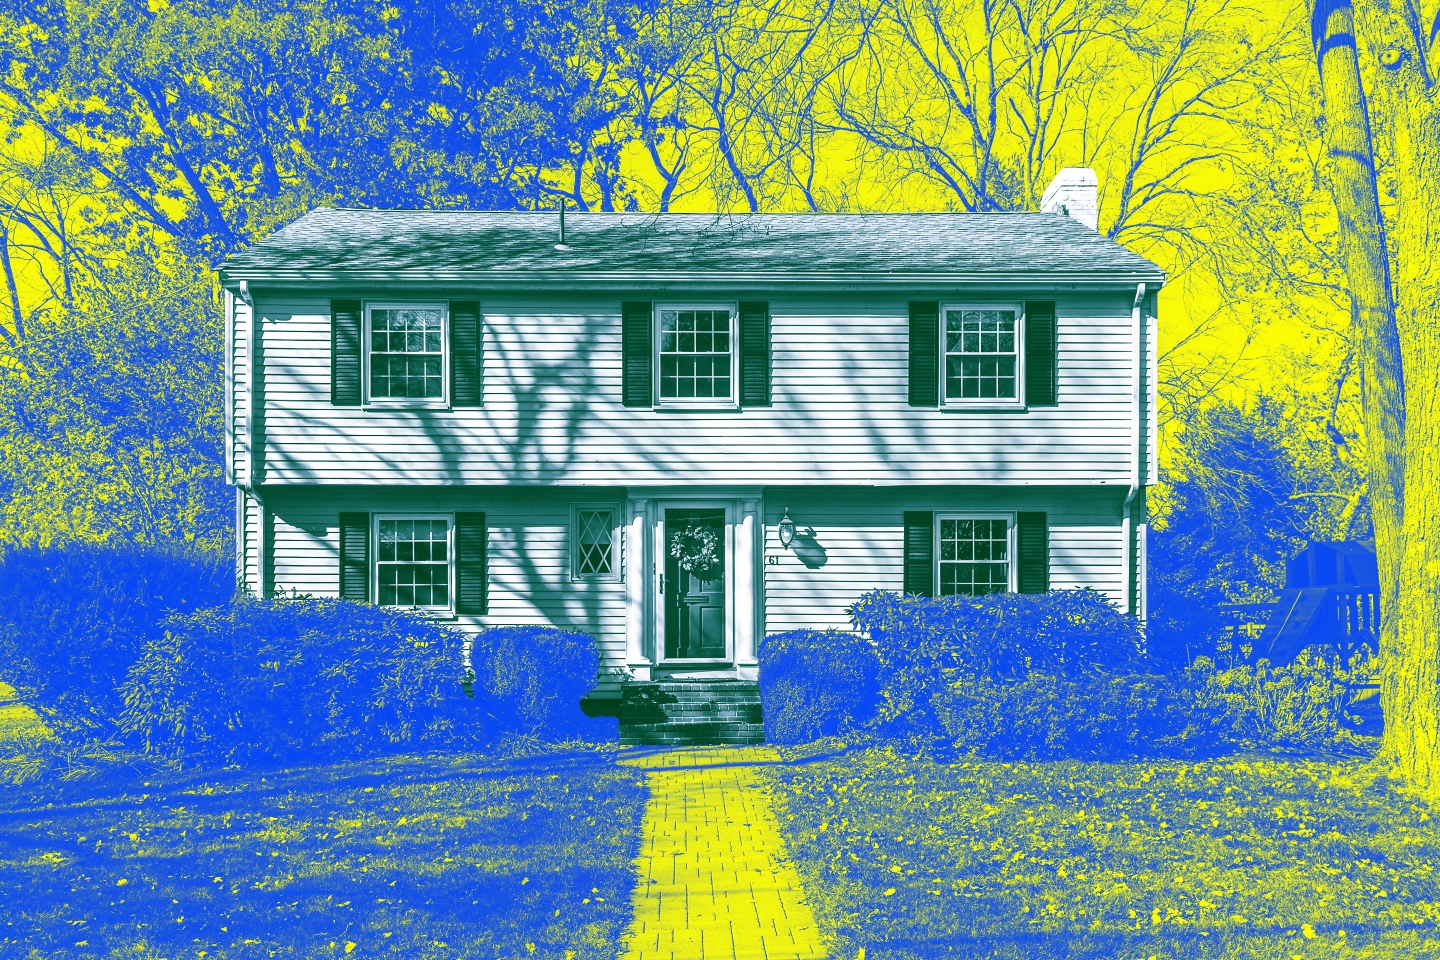 Photo of a two story house surrounded by a front yard and trees that's been treated with yellow and blue colors.